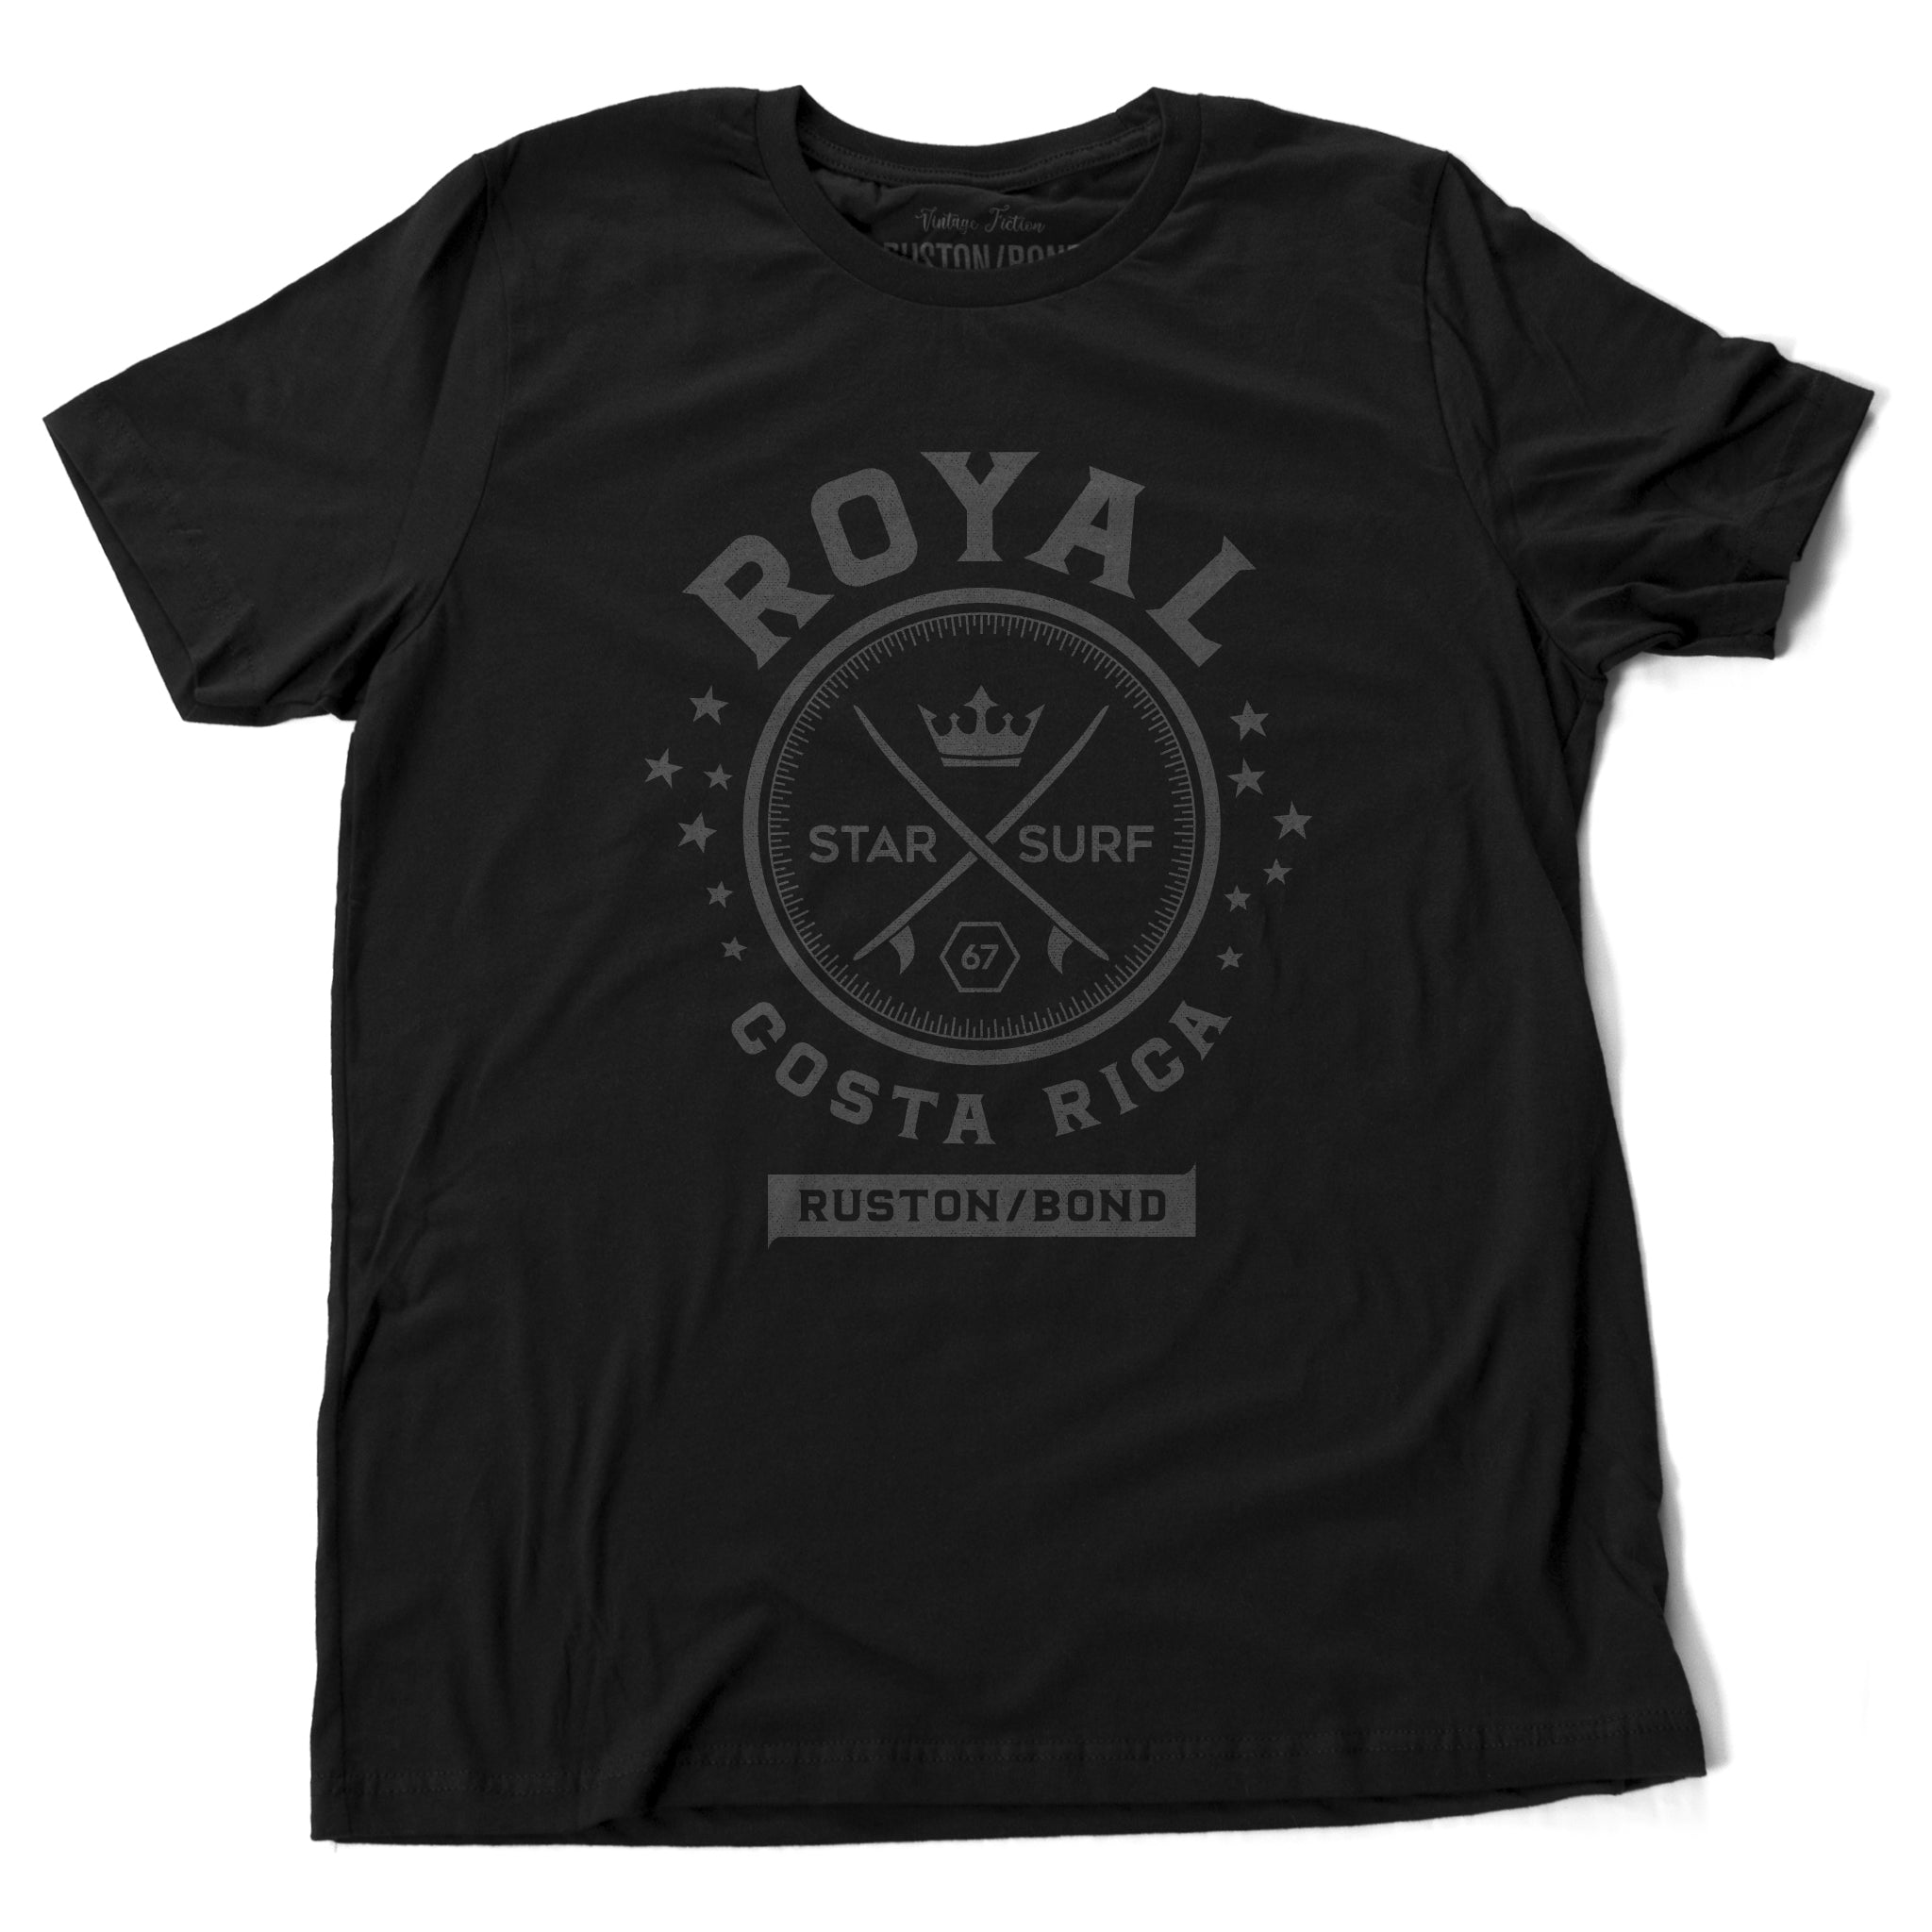 A vintage-inspired Classic Black t-shirt with a retro graphic of crossed surfboards and a crown, surrounded by the words ROYAL / STAR SURF / COSTA RICA. By the fashion brand Ruston/Bond, for Wolfsaint.net